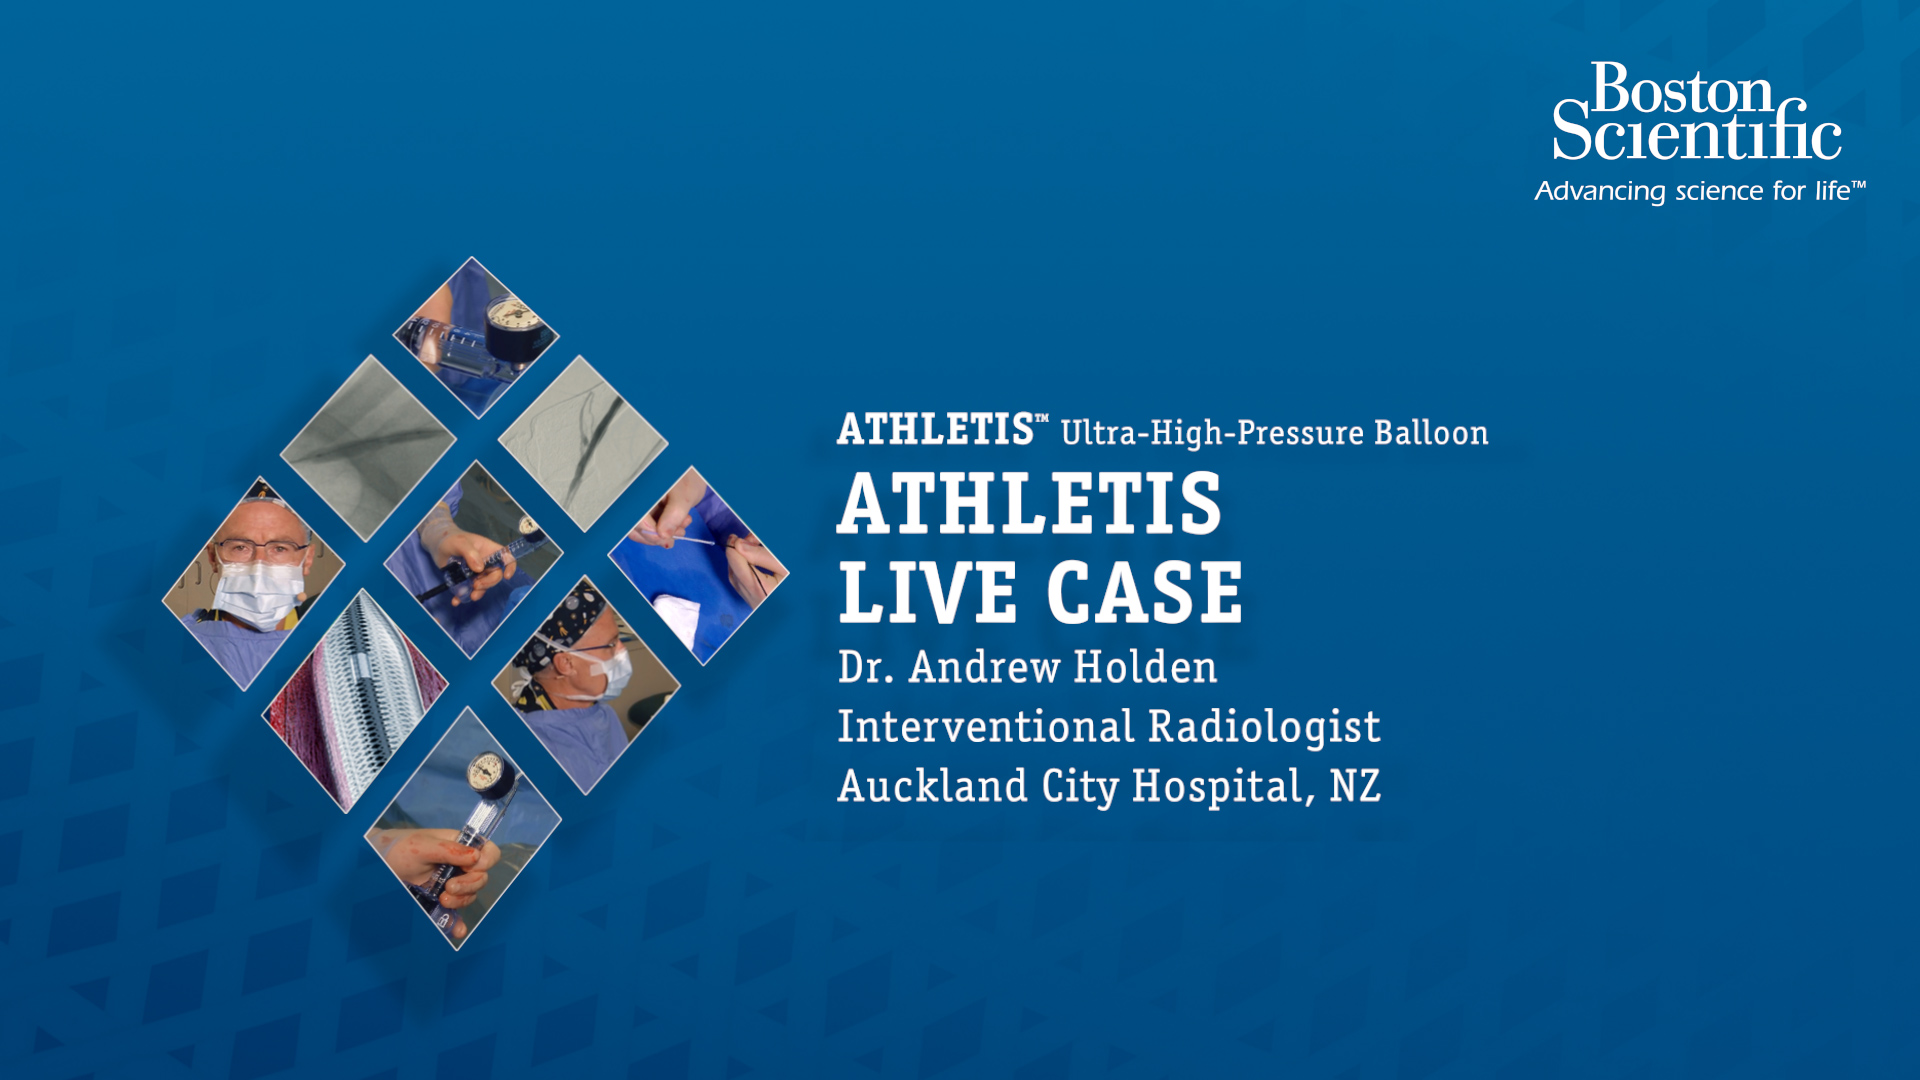 Access the AV fistula recorded case by Dr. Andrew Holden using Athletis™ for the first time